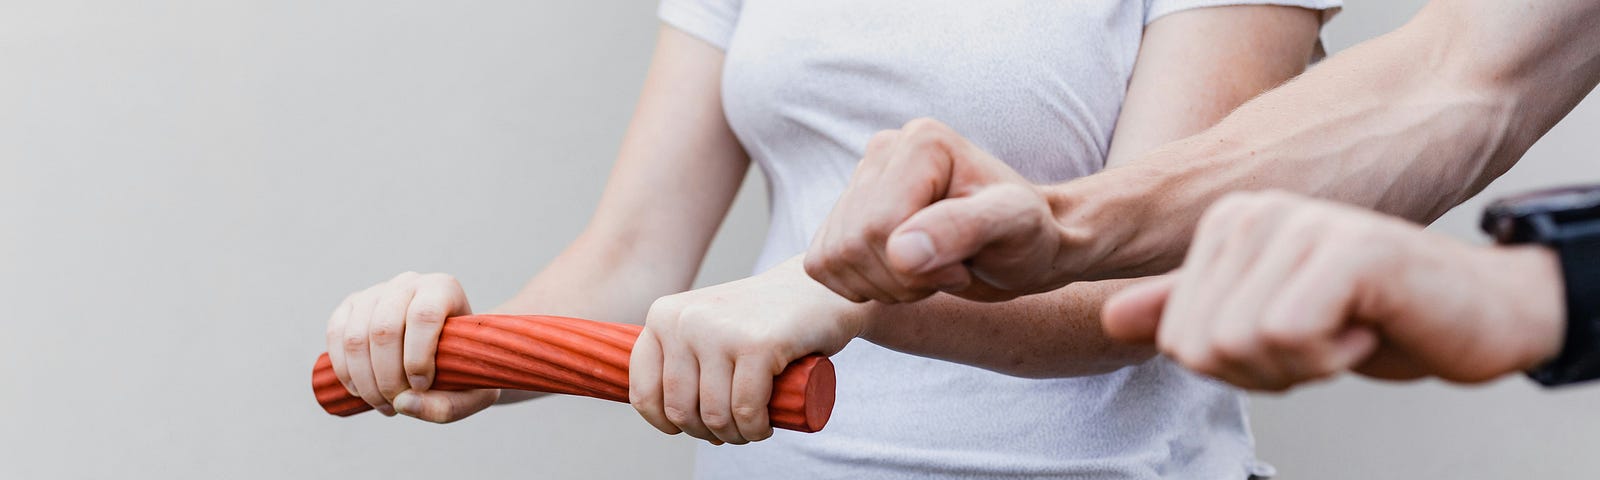 Physiotherapist teaching a patient how to do wrist and elbow mobility and strenghtening exercises using a rubber cylinder